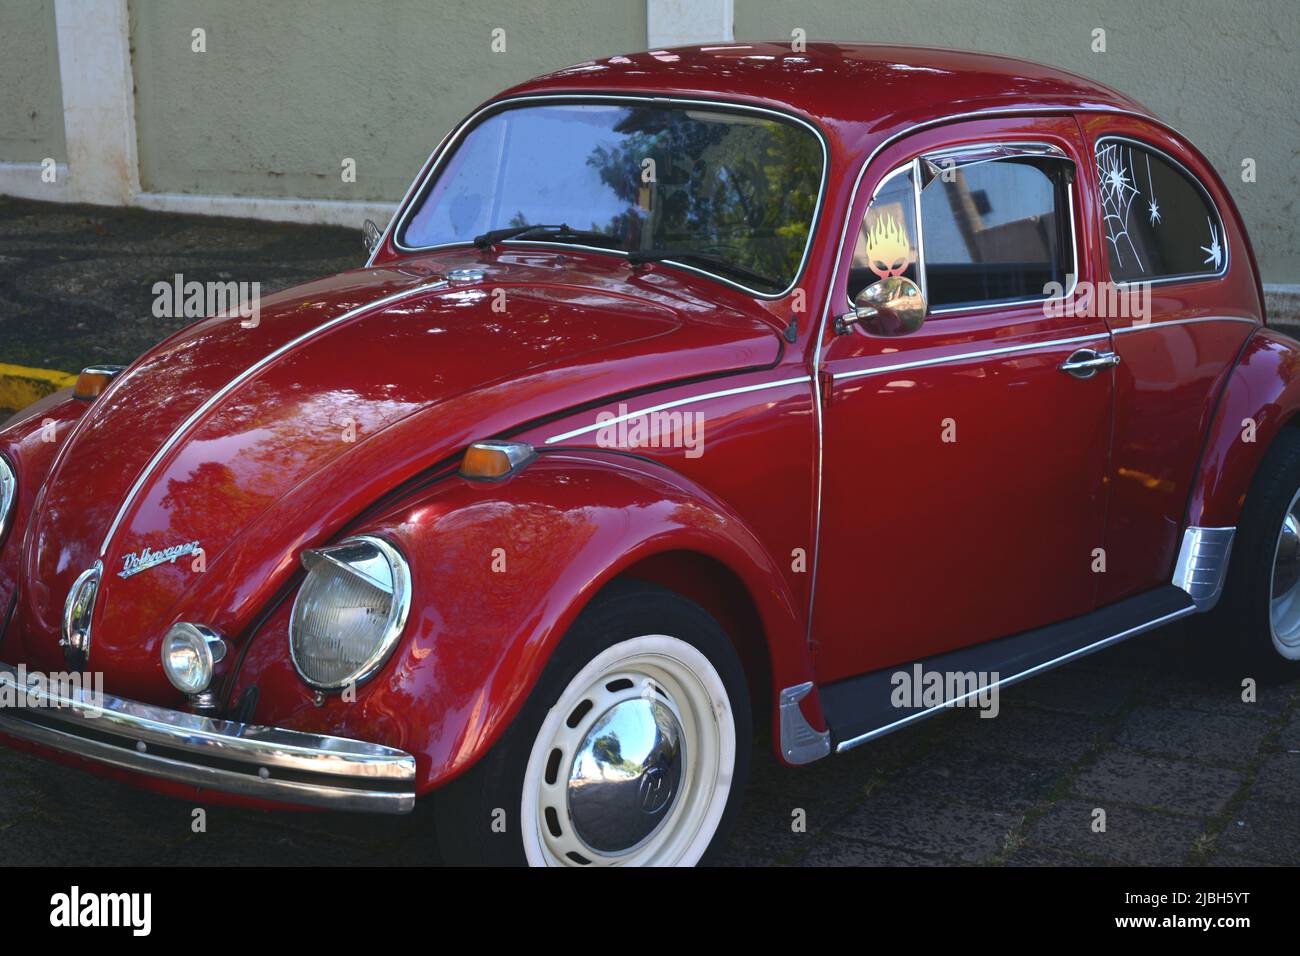 Vintage Volkswagen car on exhibition of vintage cars in Brazil, South America in zoom photo, side, with mile marker, red color Stock Photo